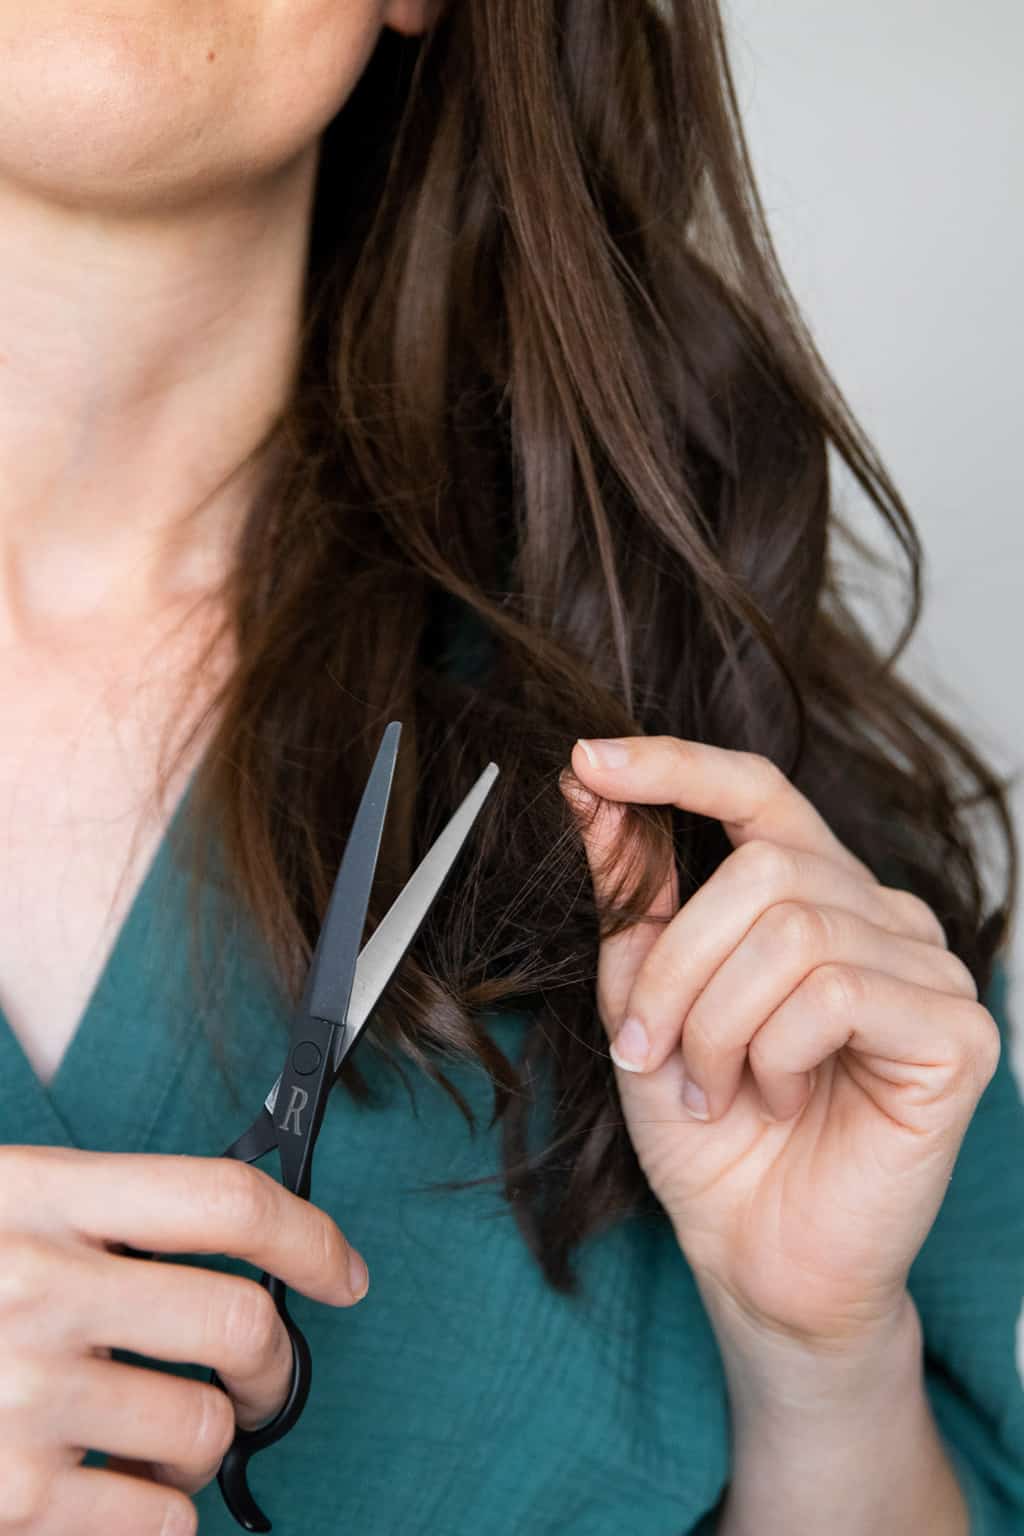 Grab a pair of hair cutting shears and a couple hair ties - we'll show you how to cut your hair at home with the ponytail method